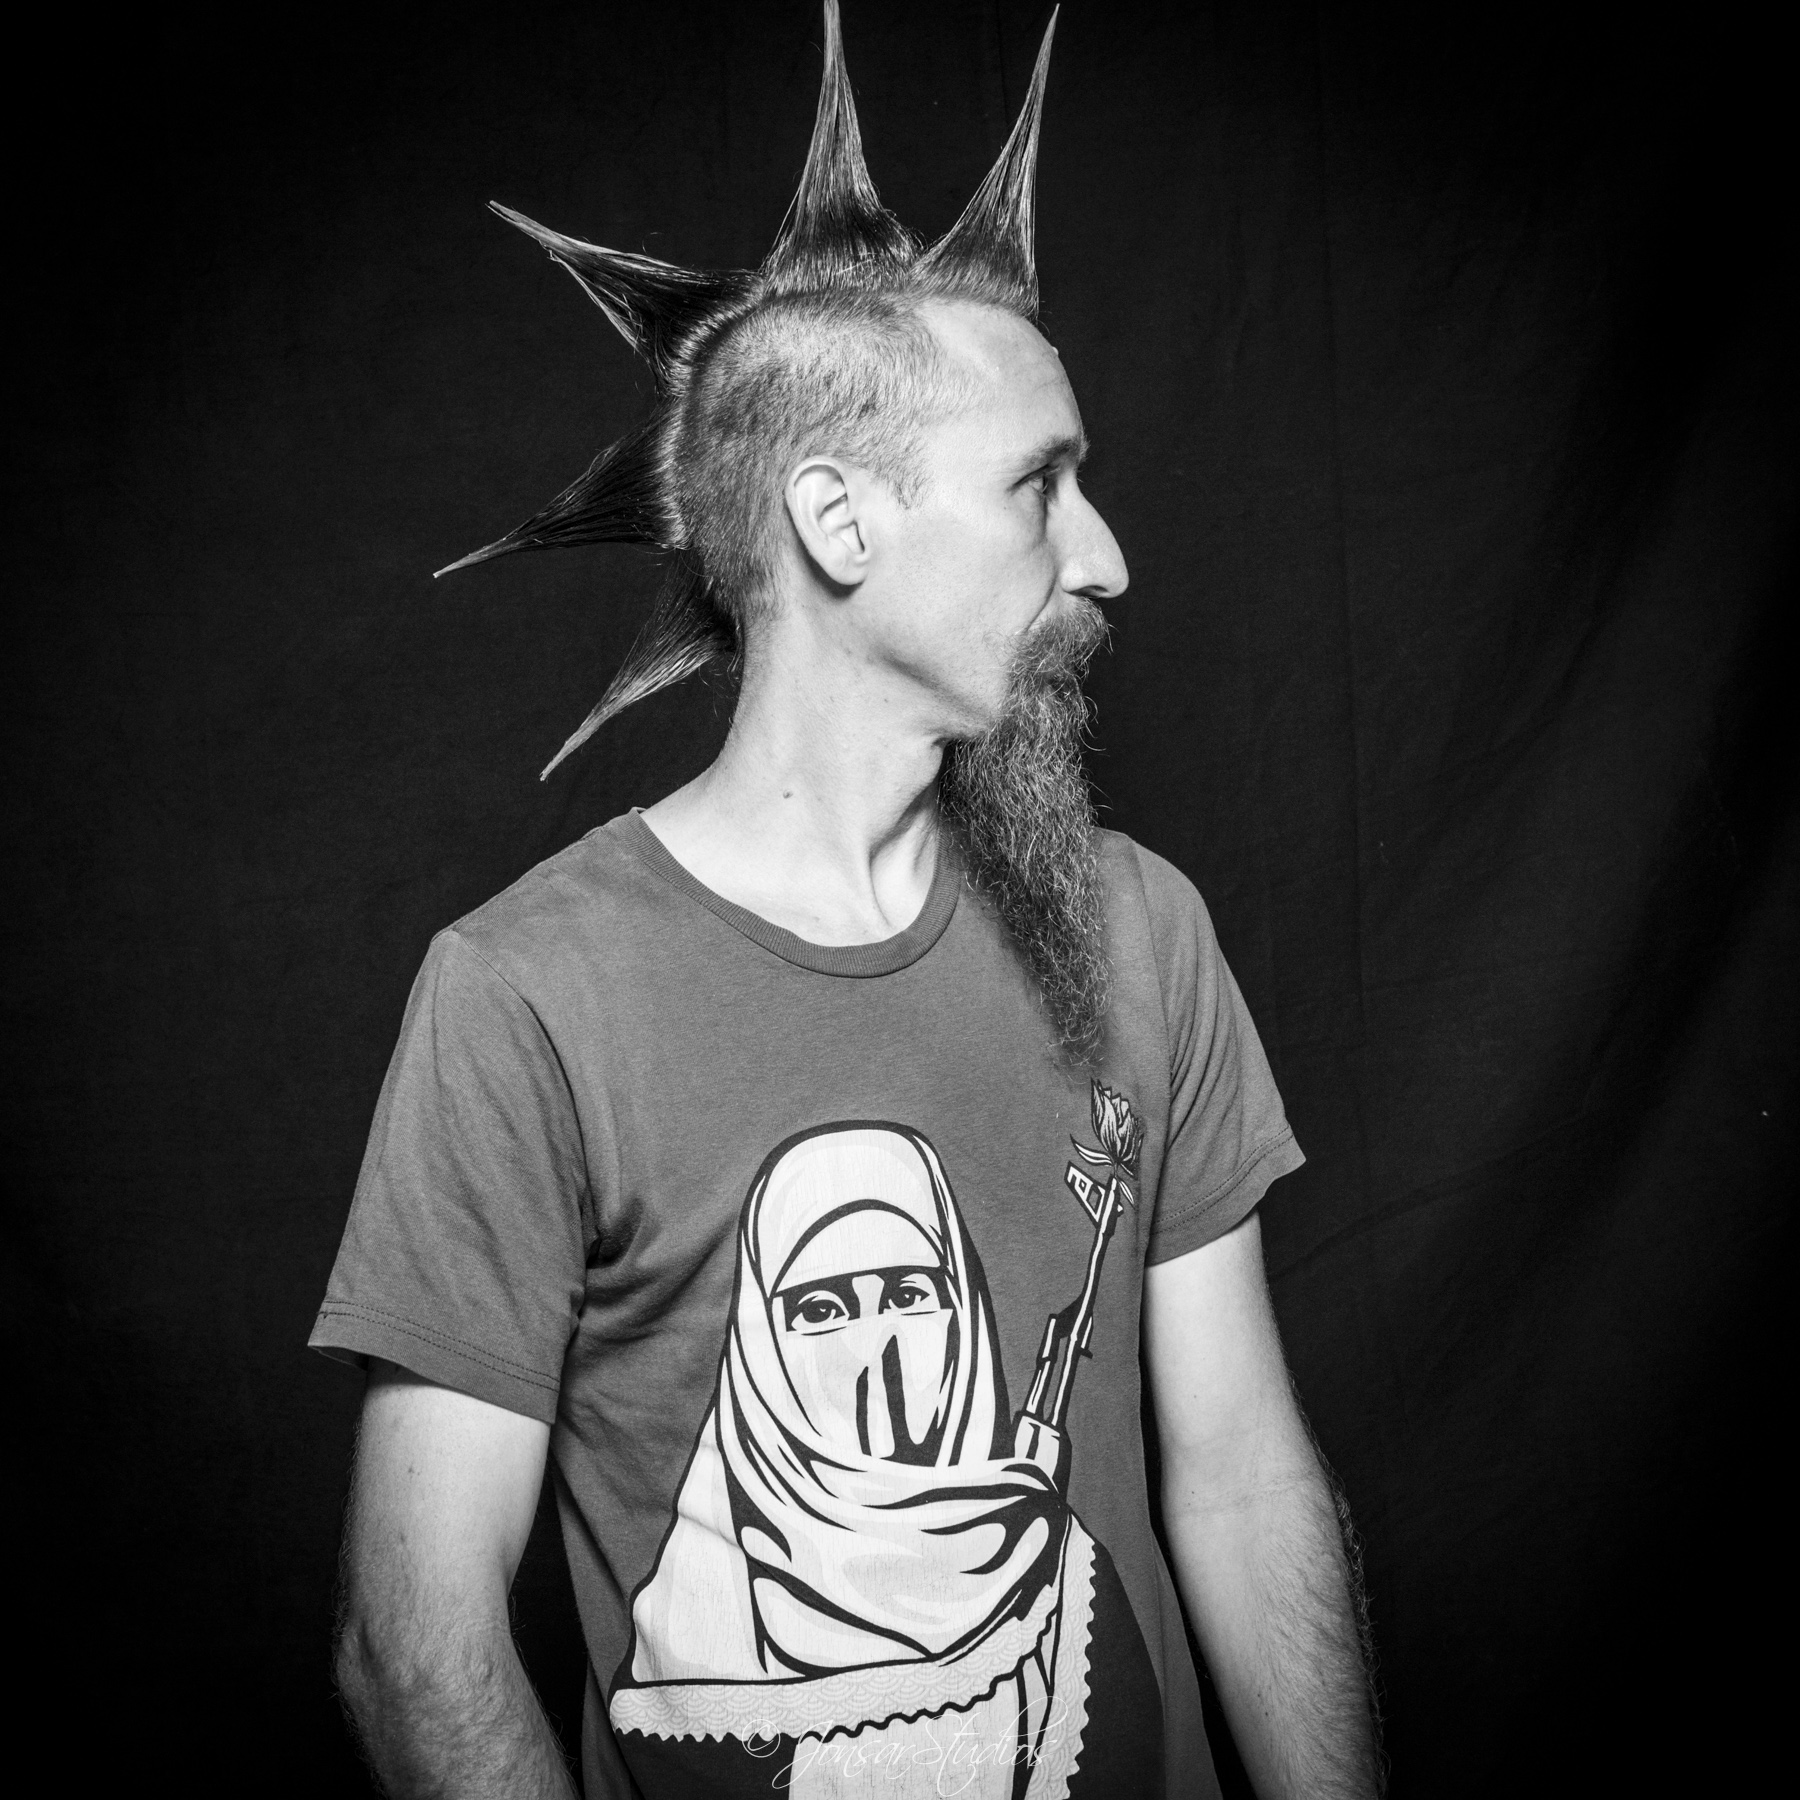 Profile of man with spiked mohawk and gun teeshirt, photographed on black background